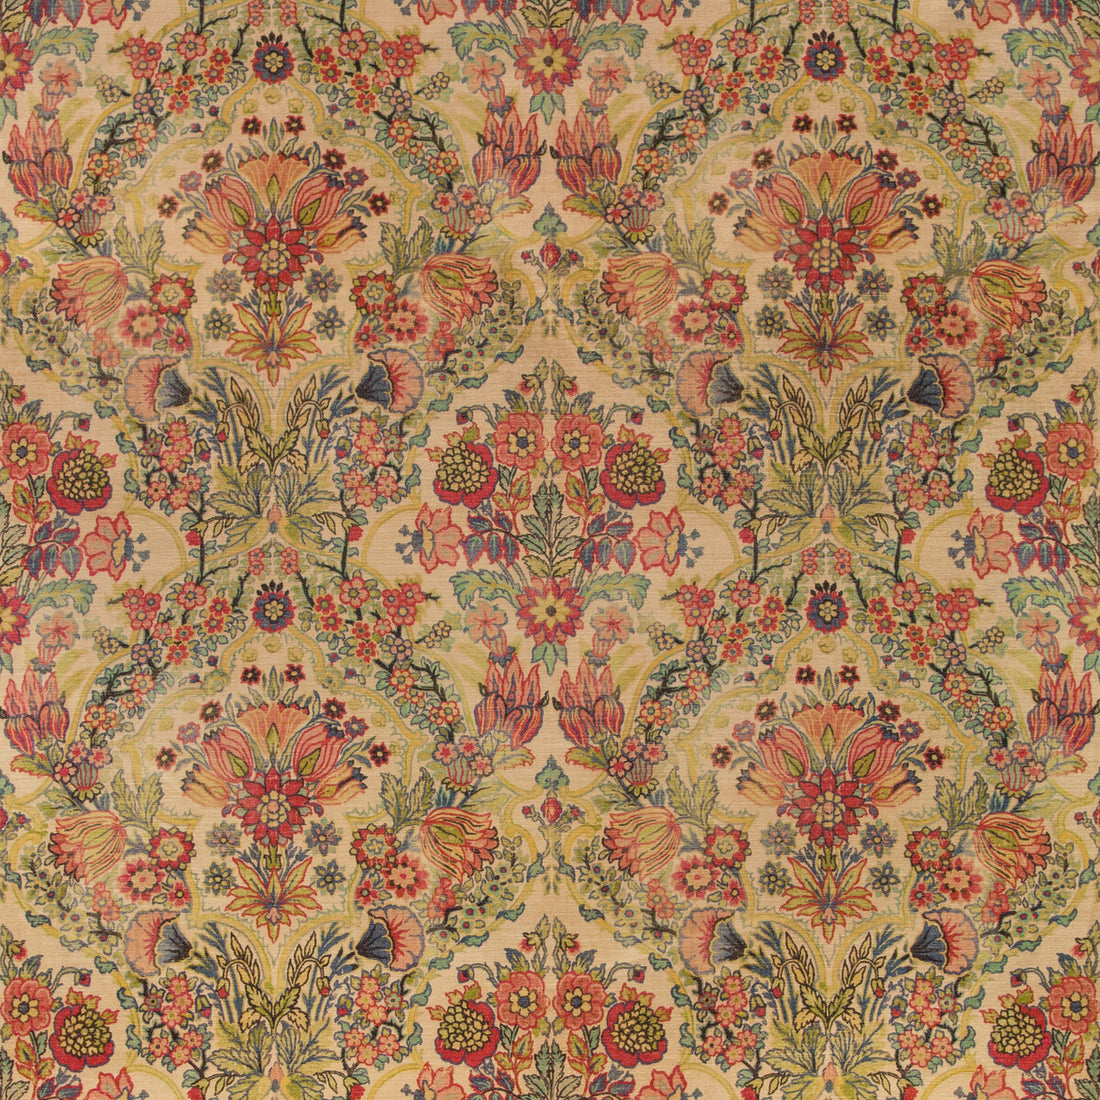 Tetbury Velvet fabric in multi color - pattern 2019115.735.0 - by Lee Jofa in the Manor House collection